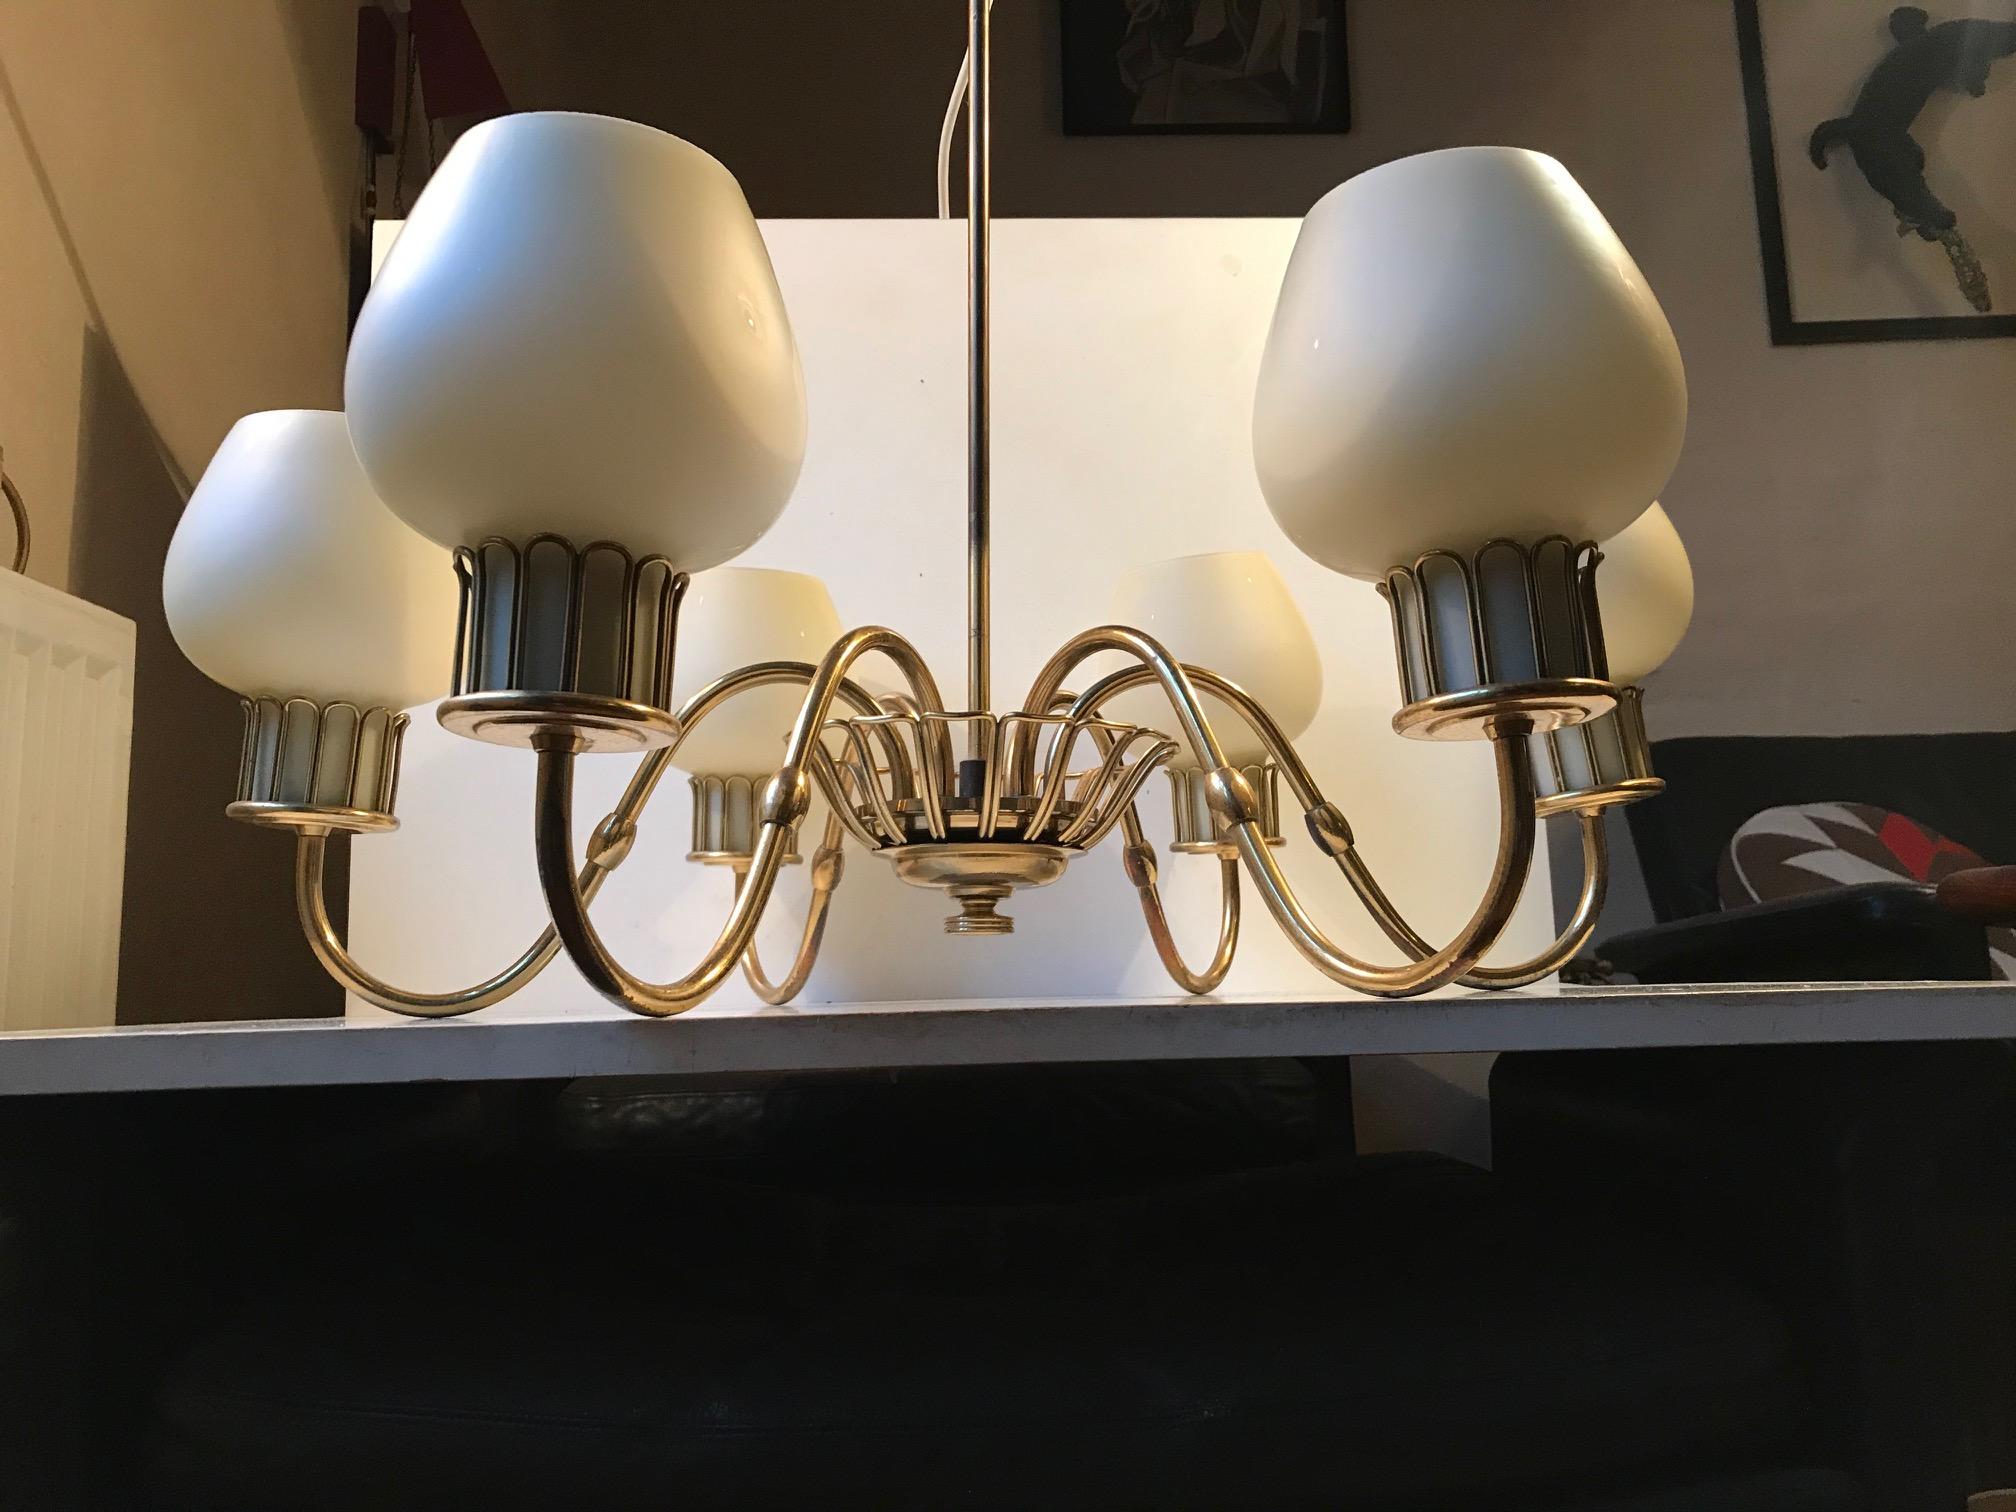 Spider construction in brass with six arms creamy white cased opaline glass shades. This design dating from the late 1940s or early 1950s is attributed to Josef Frank. It has E27 sockets and original ceiling spacer and canopy.